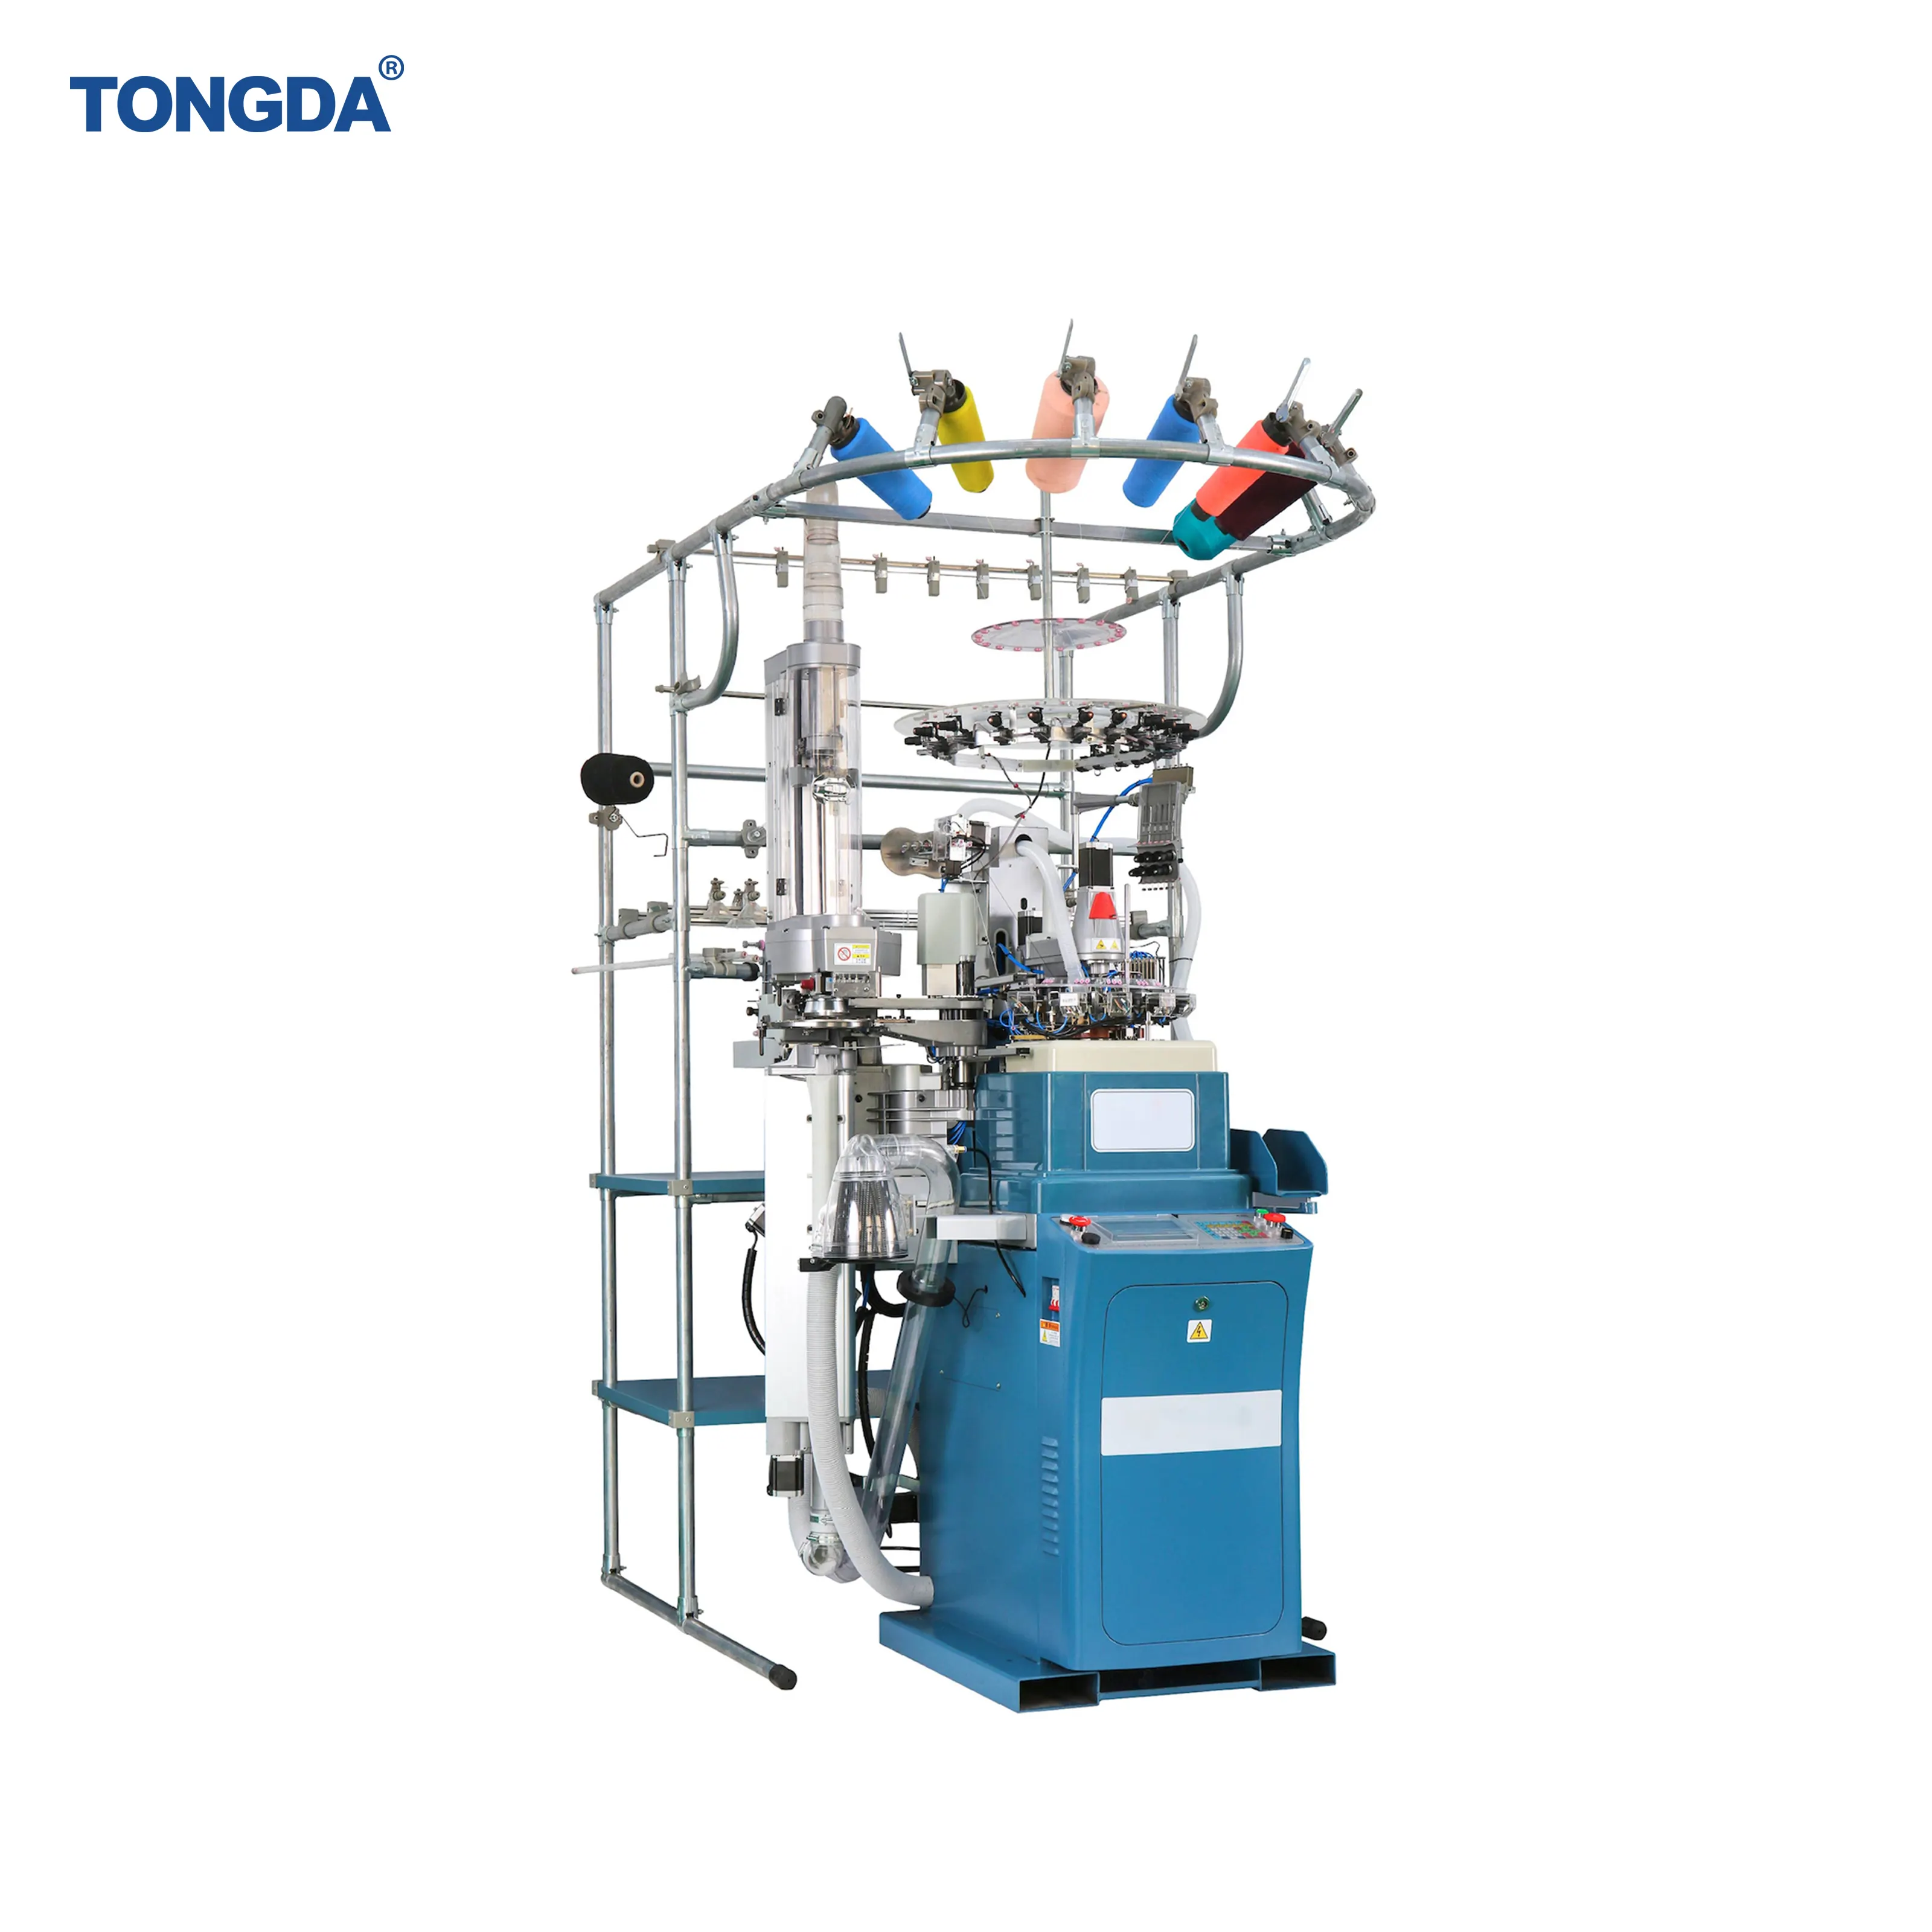 TONGDA TD-6F-PE Automatic 3.75 Inch Computerized Select Terry Industrial Weaving Sock Making Knitting Machine for Sale